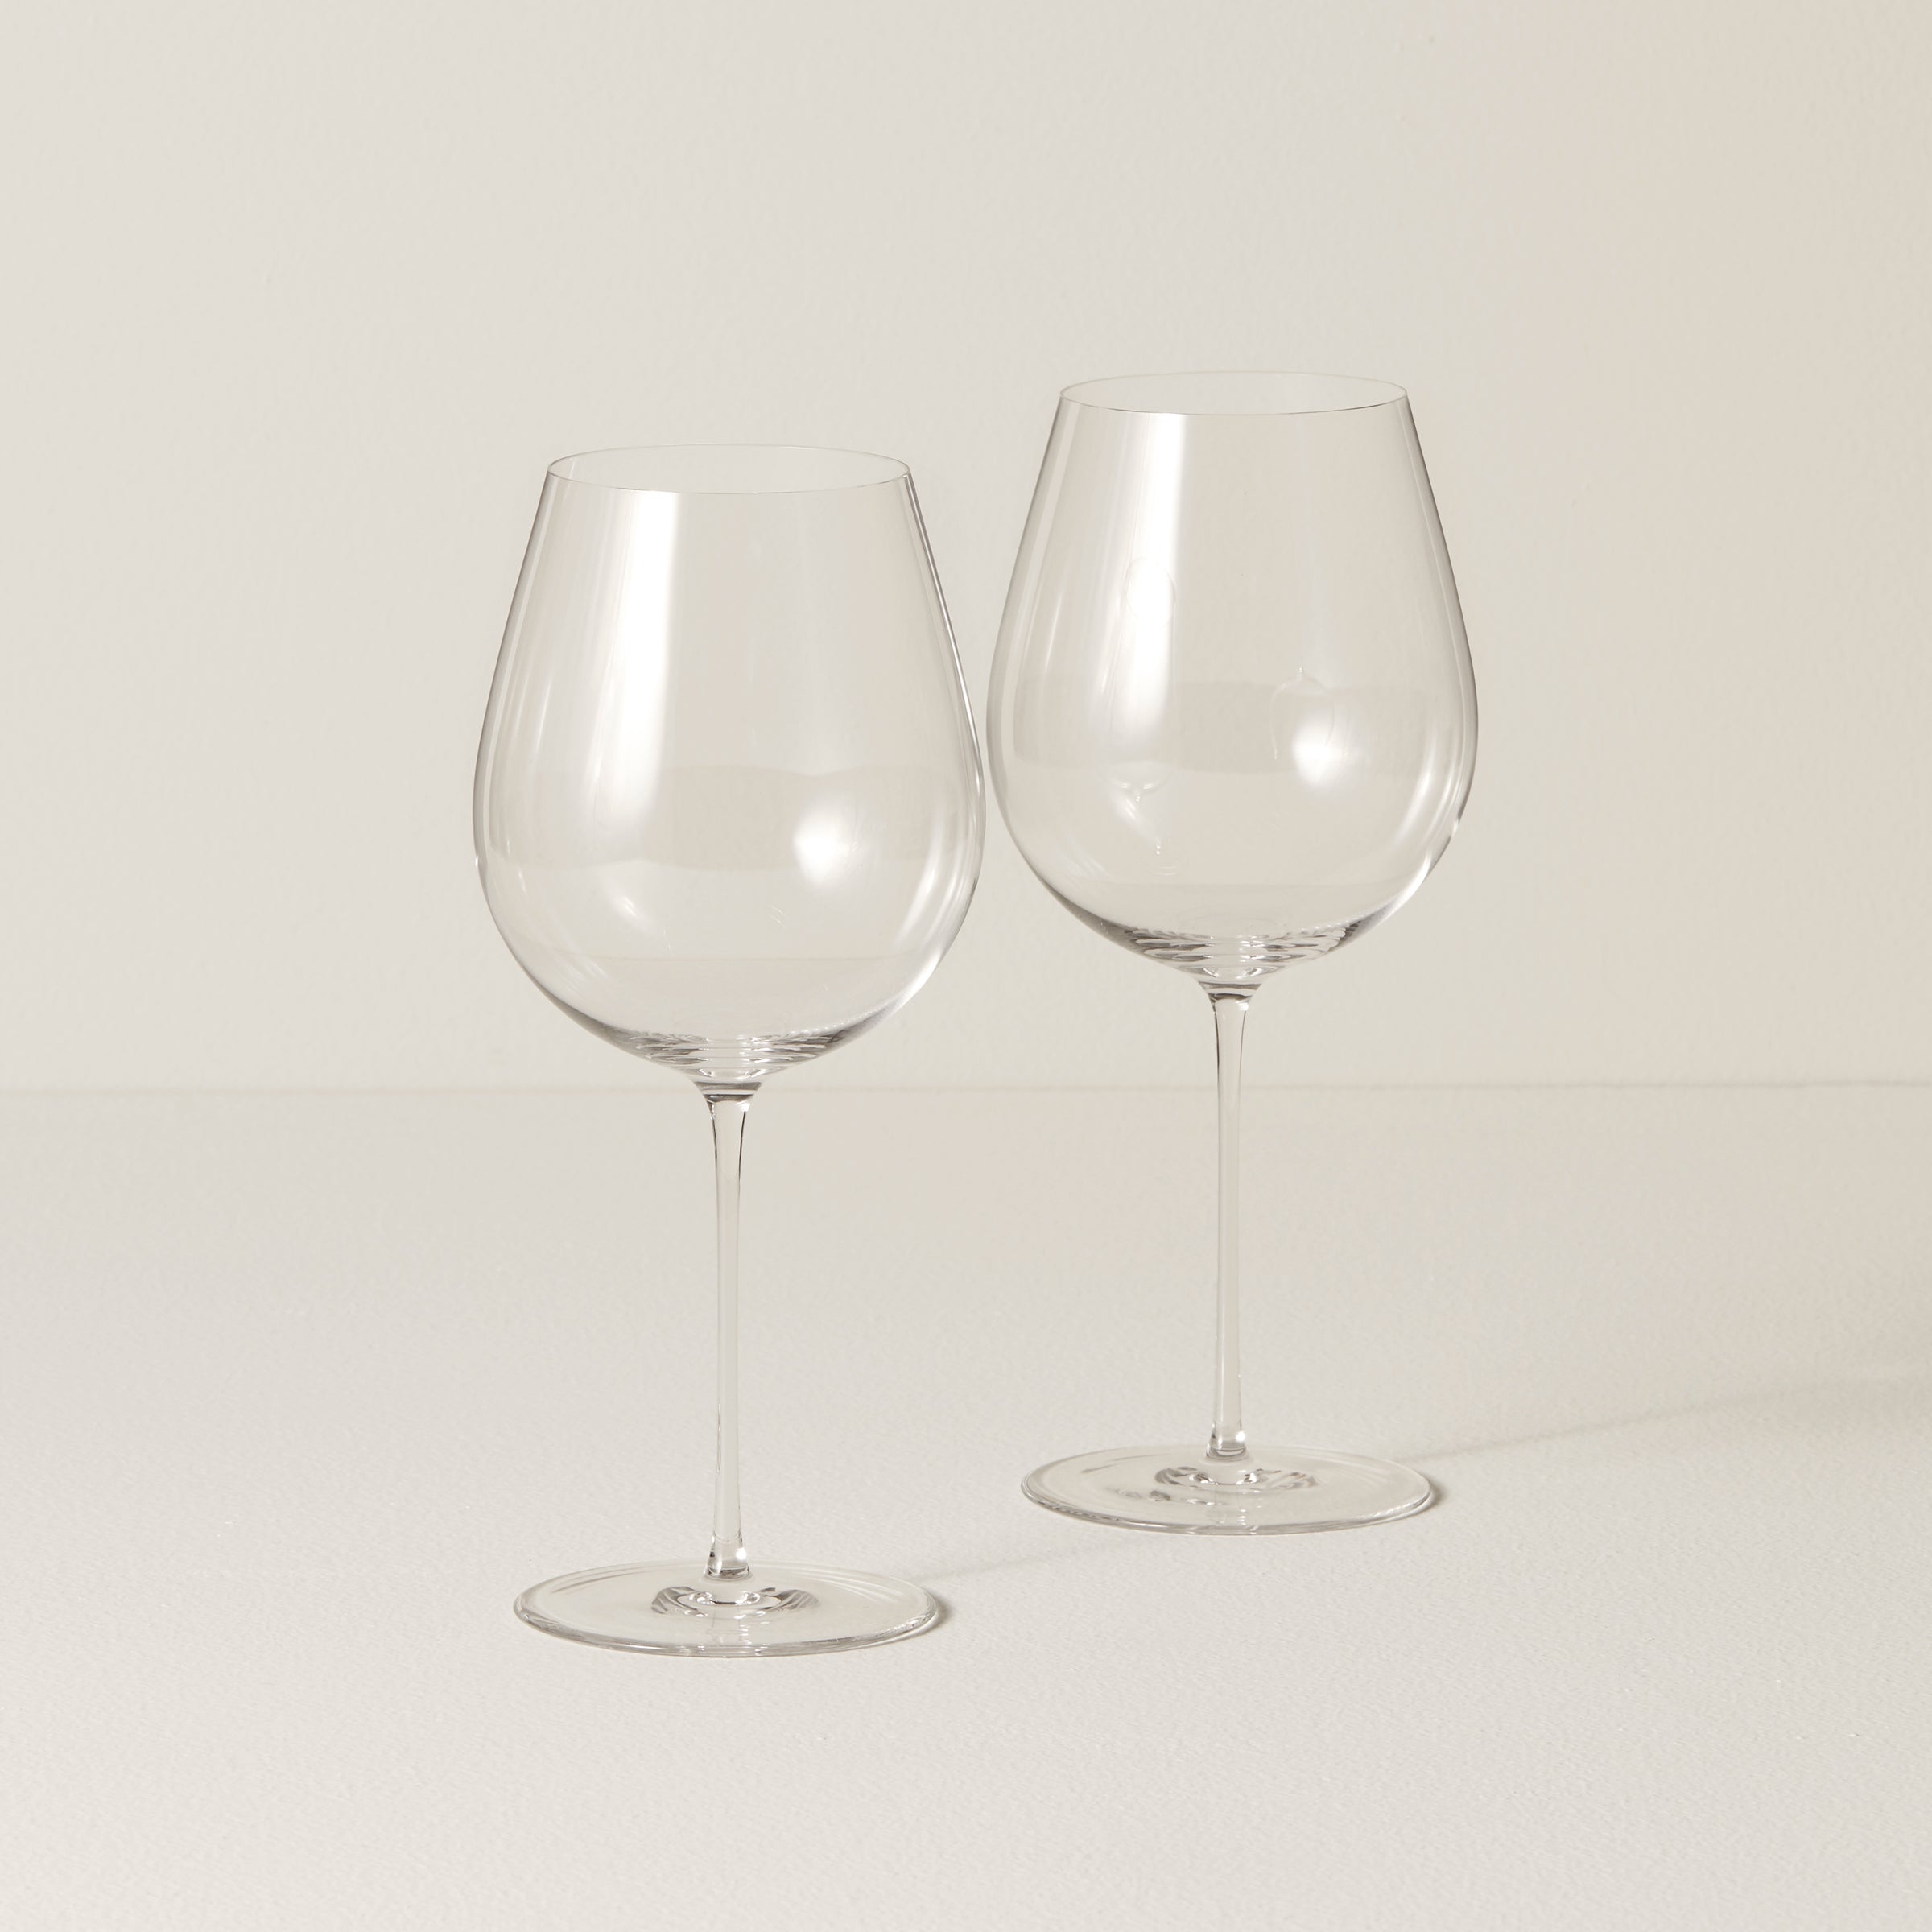 6433-thelma-louise-wine-glass-set-of-2